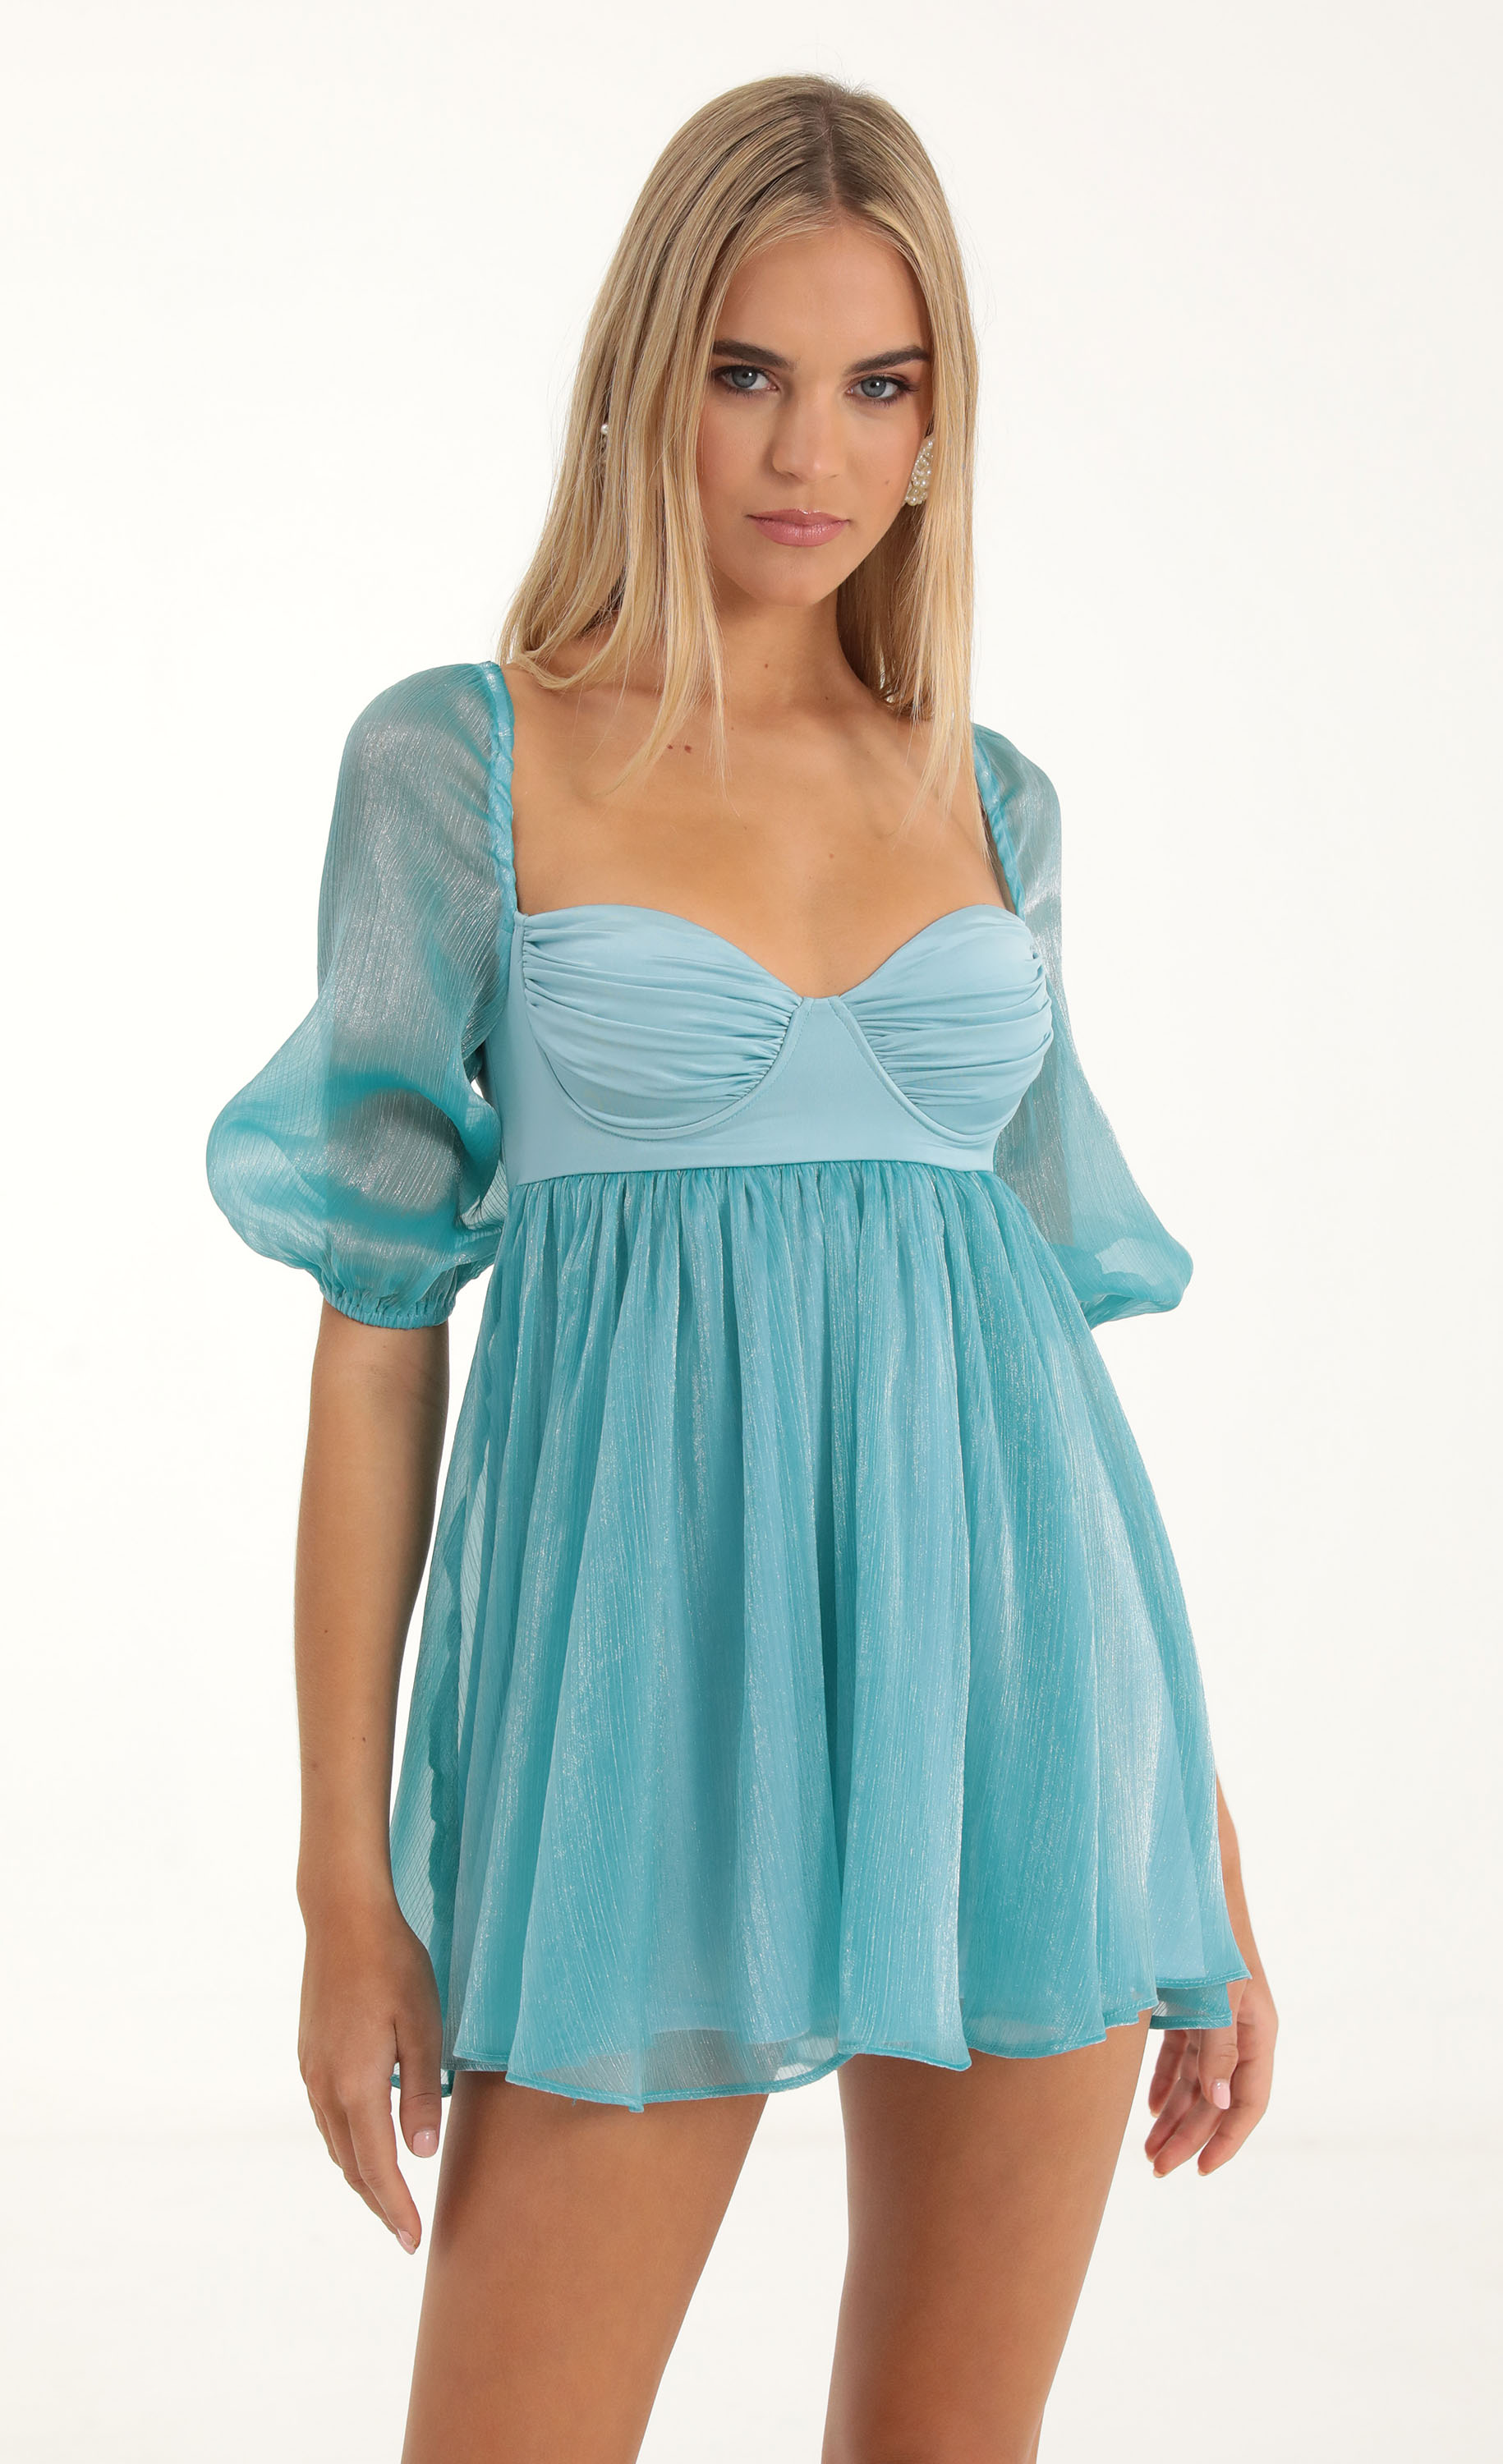 Kimber Organza Baby Doll Dress in Blue